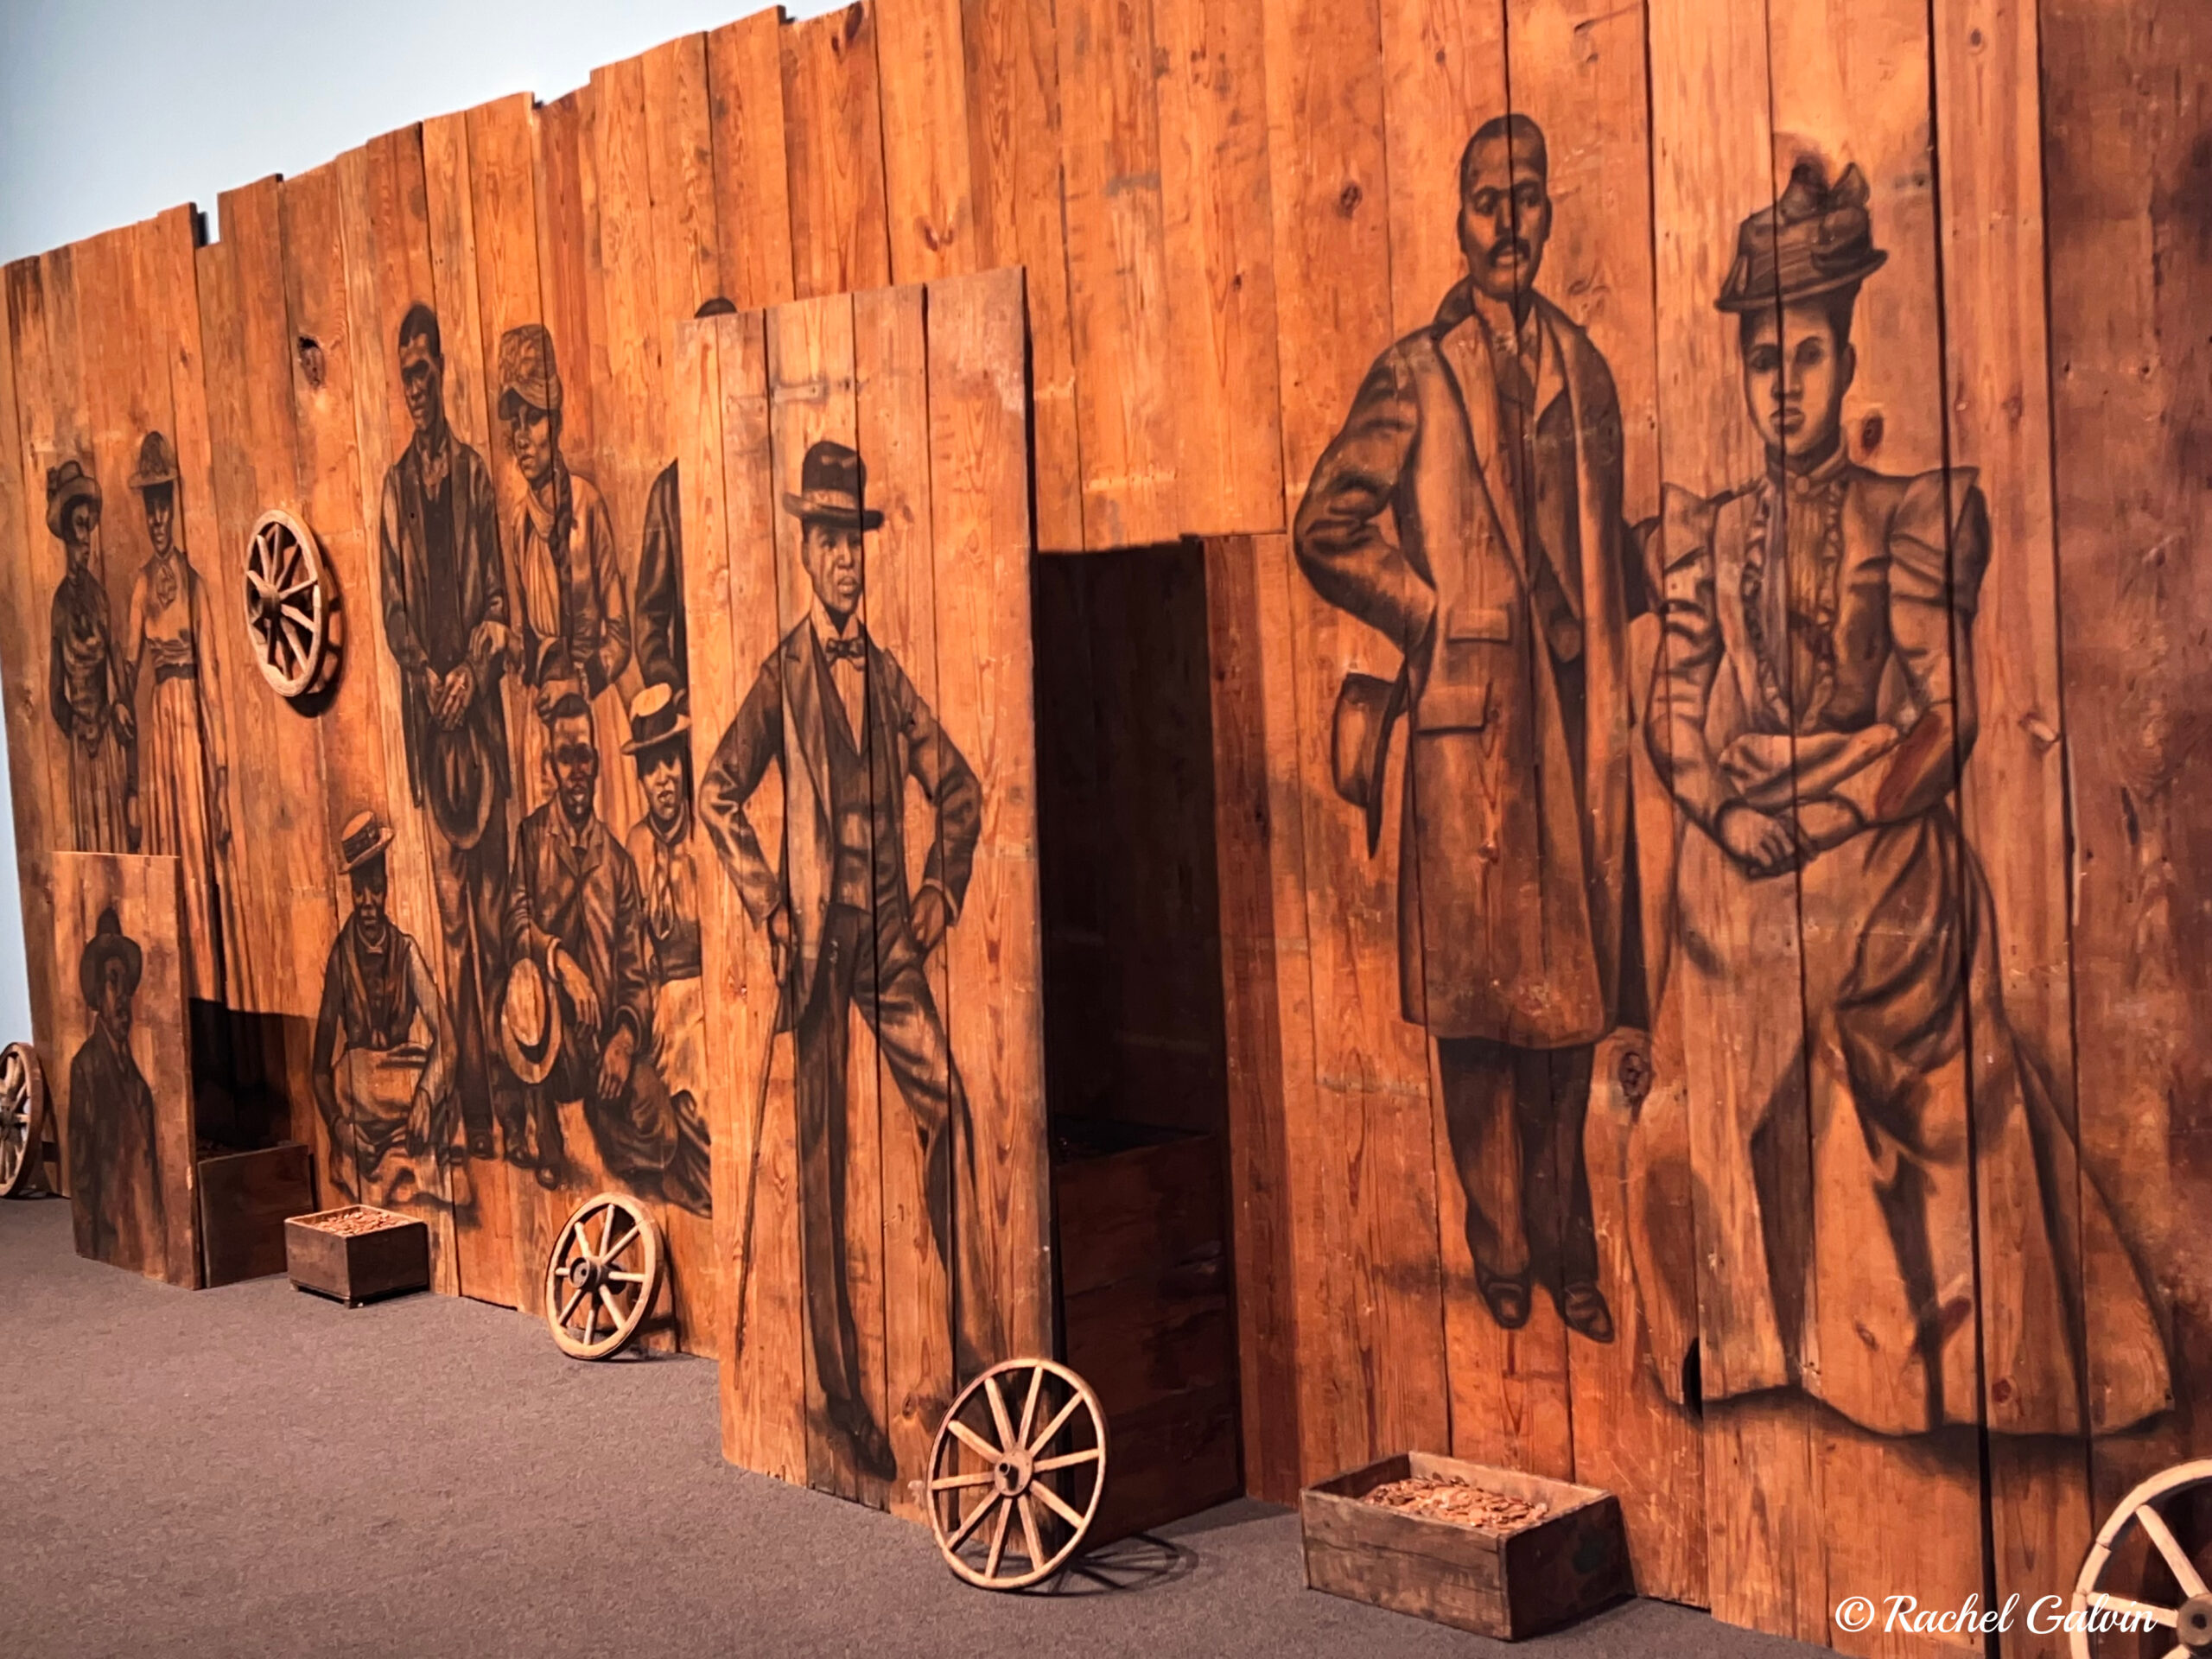 Stories Retold: Artist Whitfield Lovell’s “Passages” gives new life to history